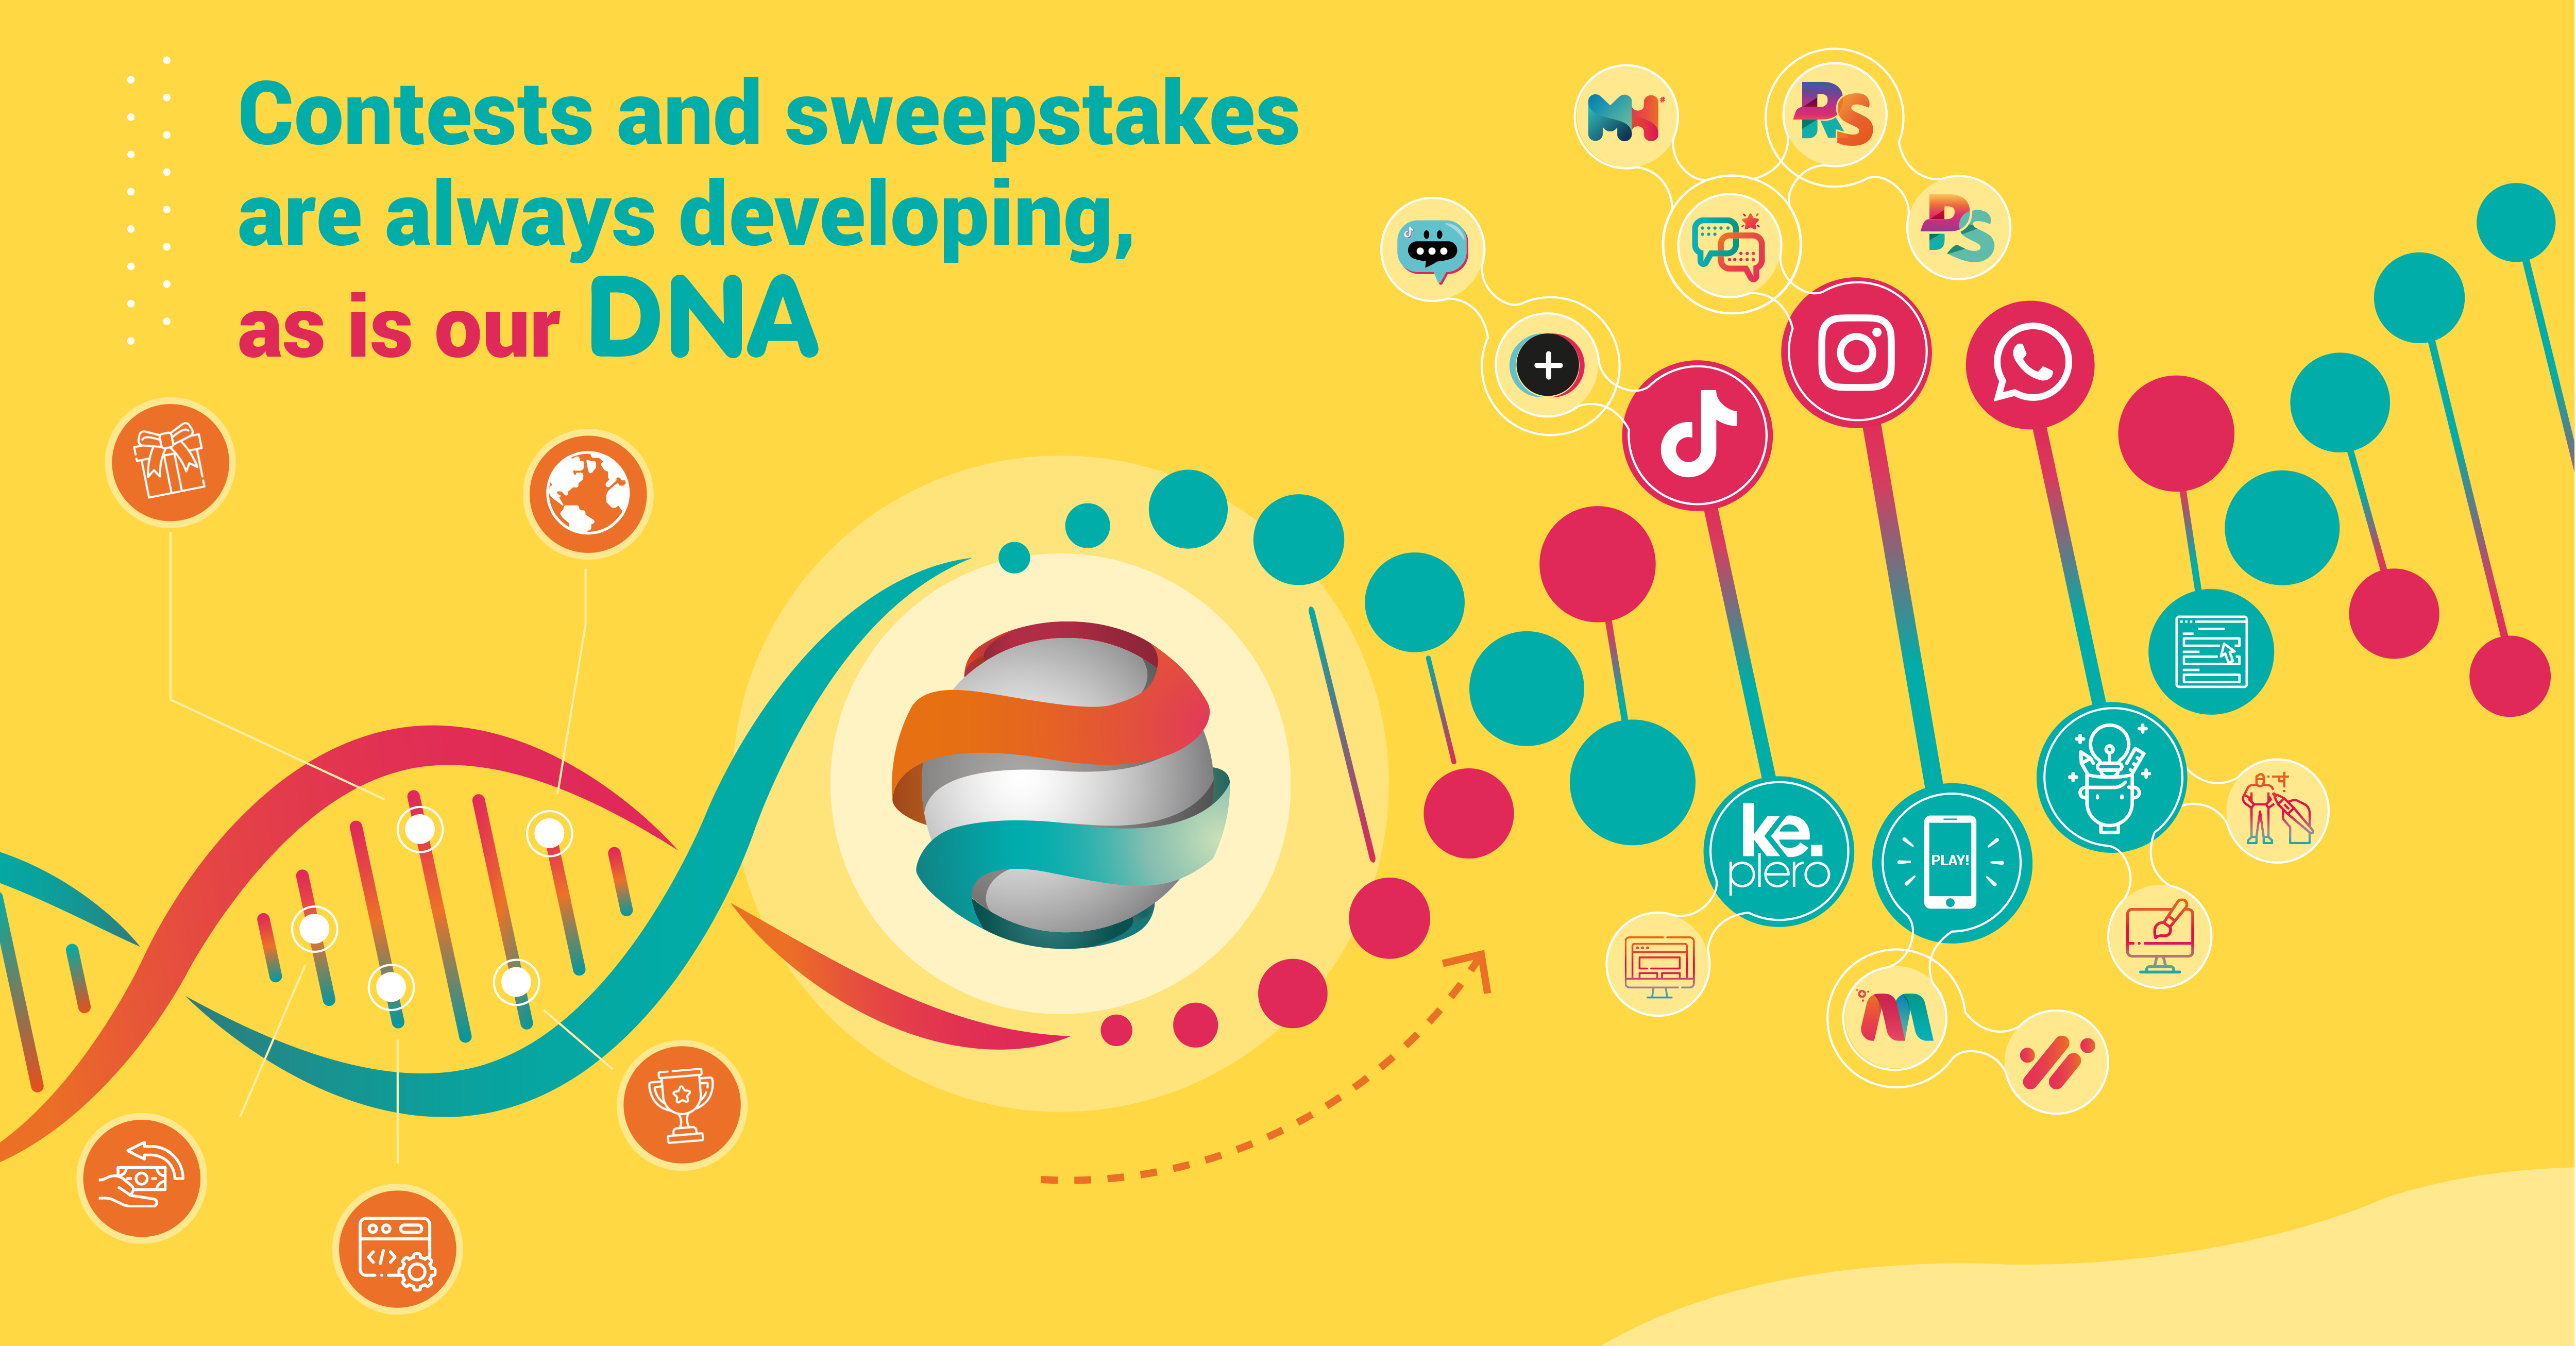 Contests and sweepstakes are always developing, as is our DNA